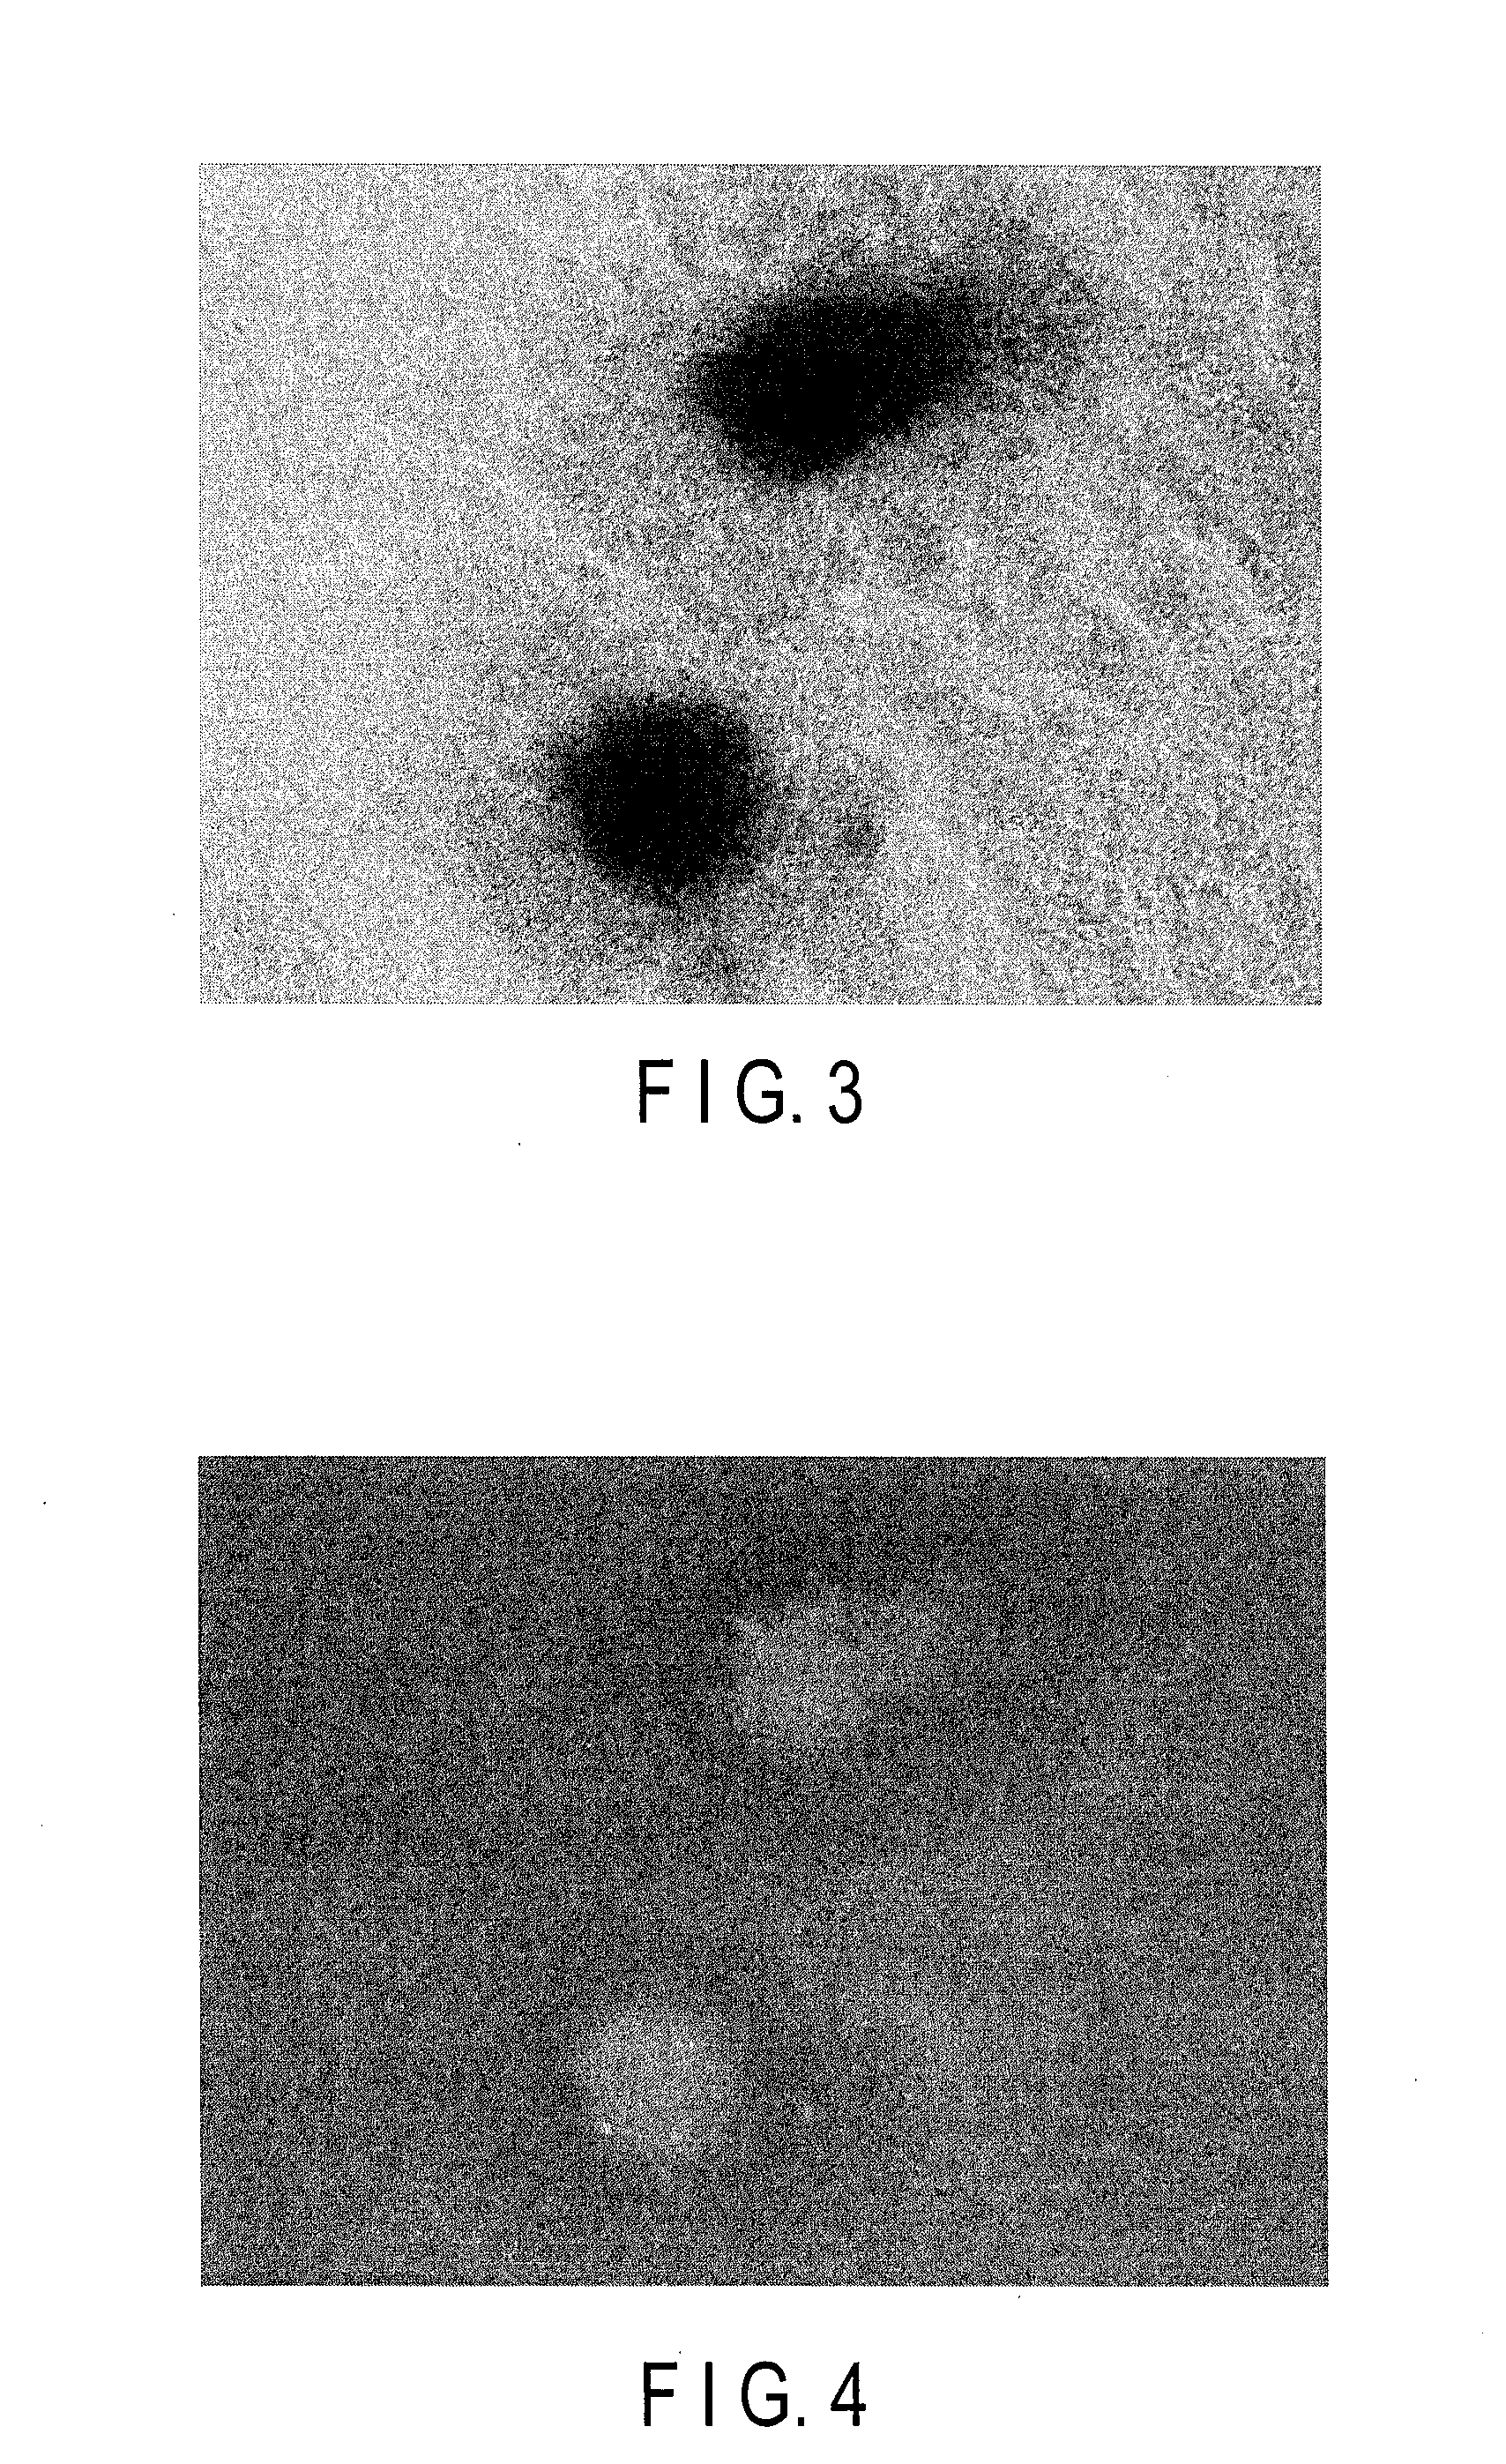 Method for monitoring differentiation into cardiac muscle cells